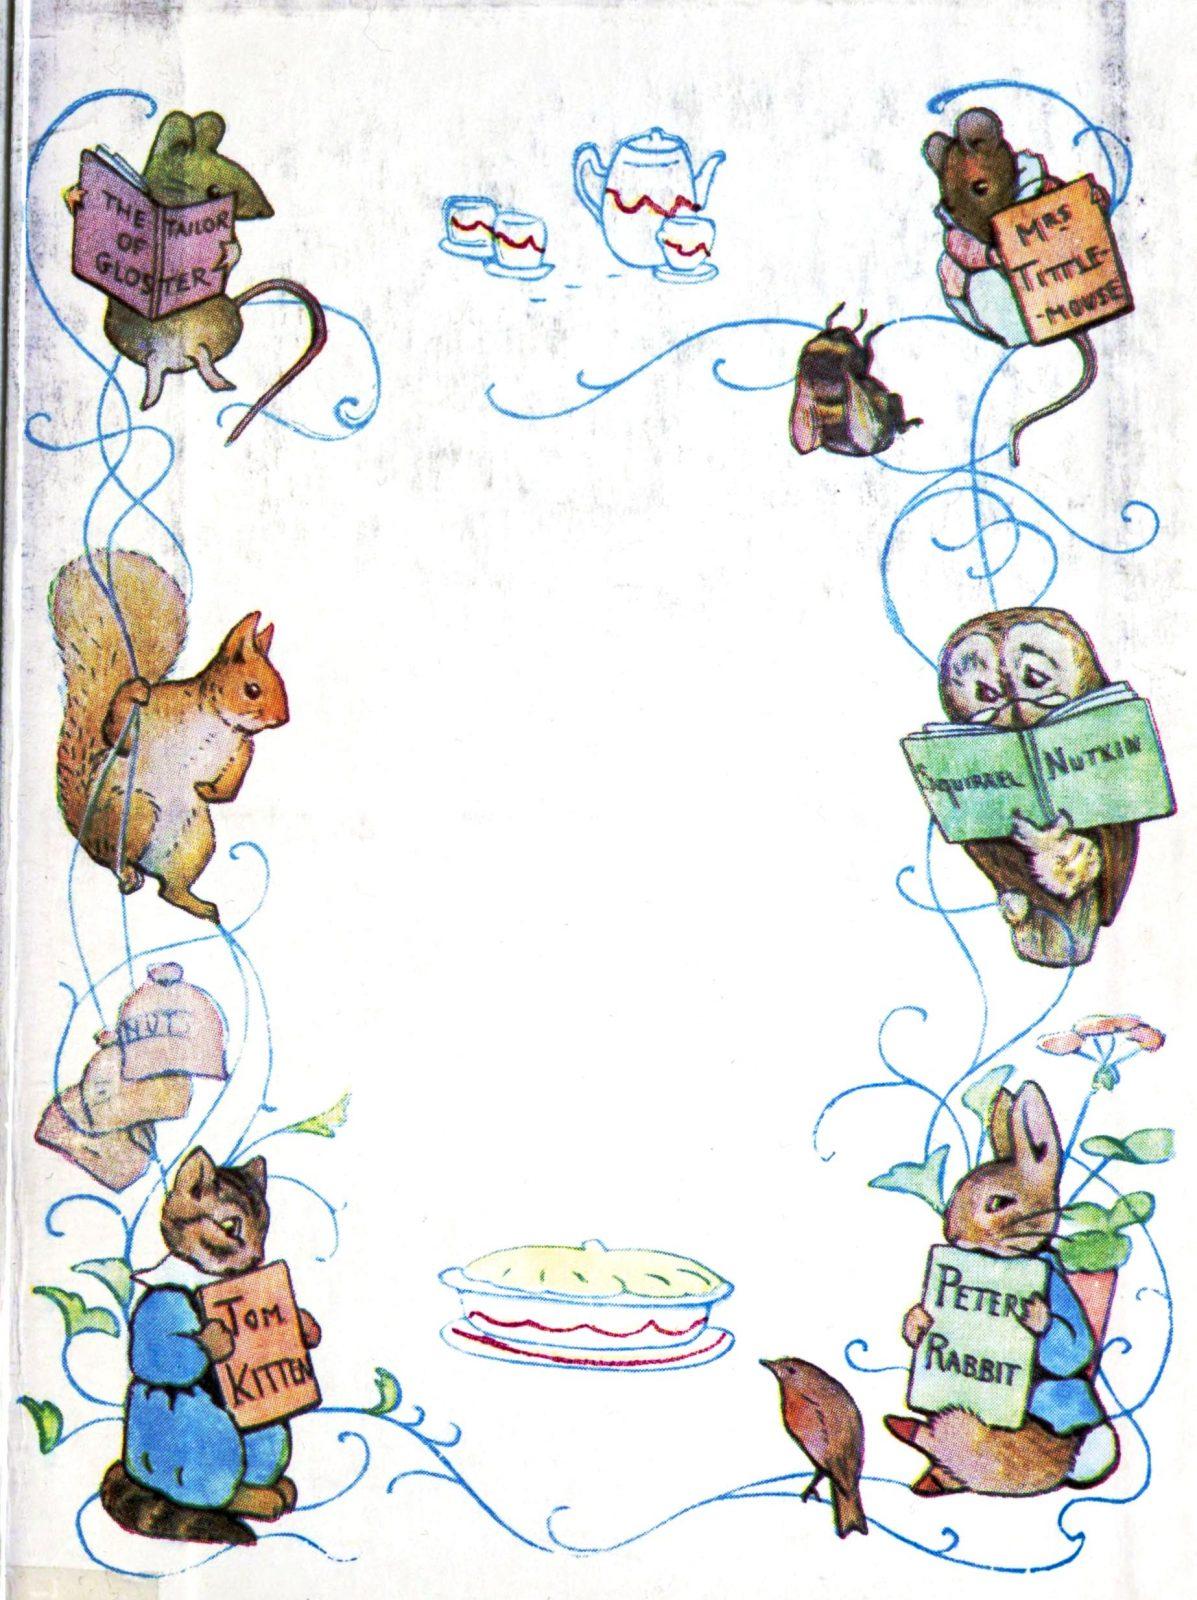 the-tale-of-peter-rabbit-free-crafts-activities-and-shower-ideas